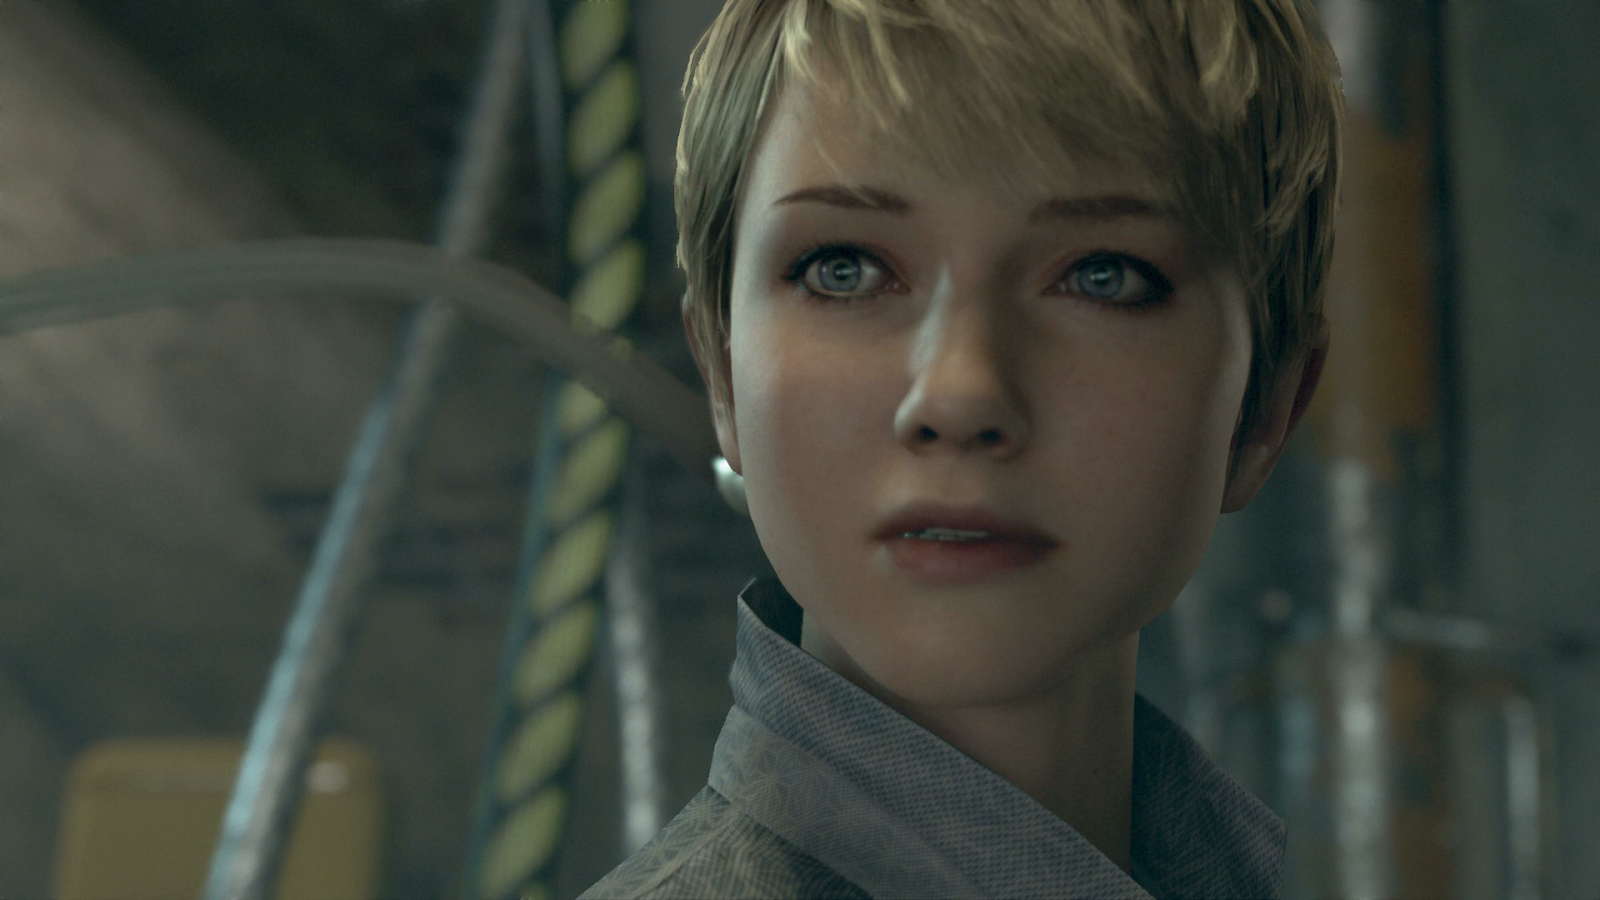 Try out Detroit Become Human's insane visuals & player-choice gameplay for  FREE on PS4